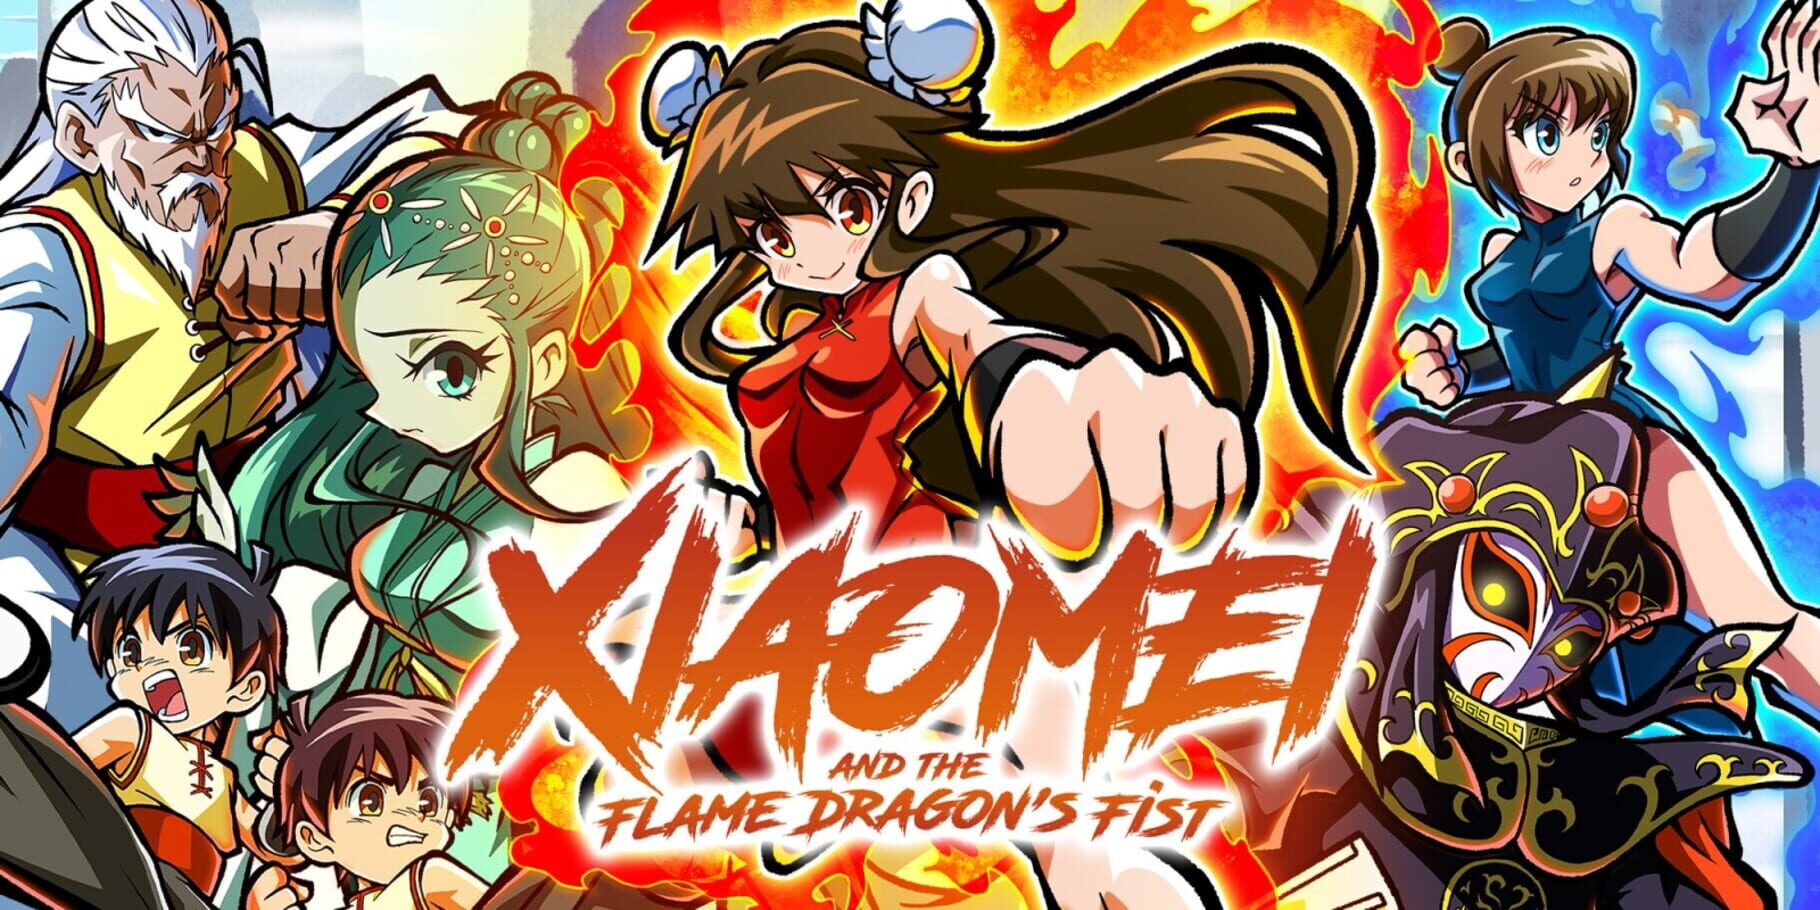 Xiaomei and the Flame Dragon's Fist artwork